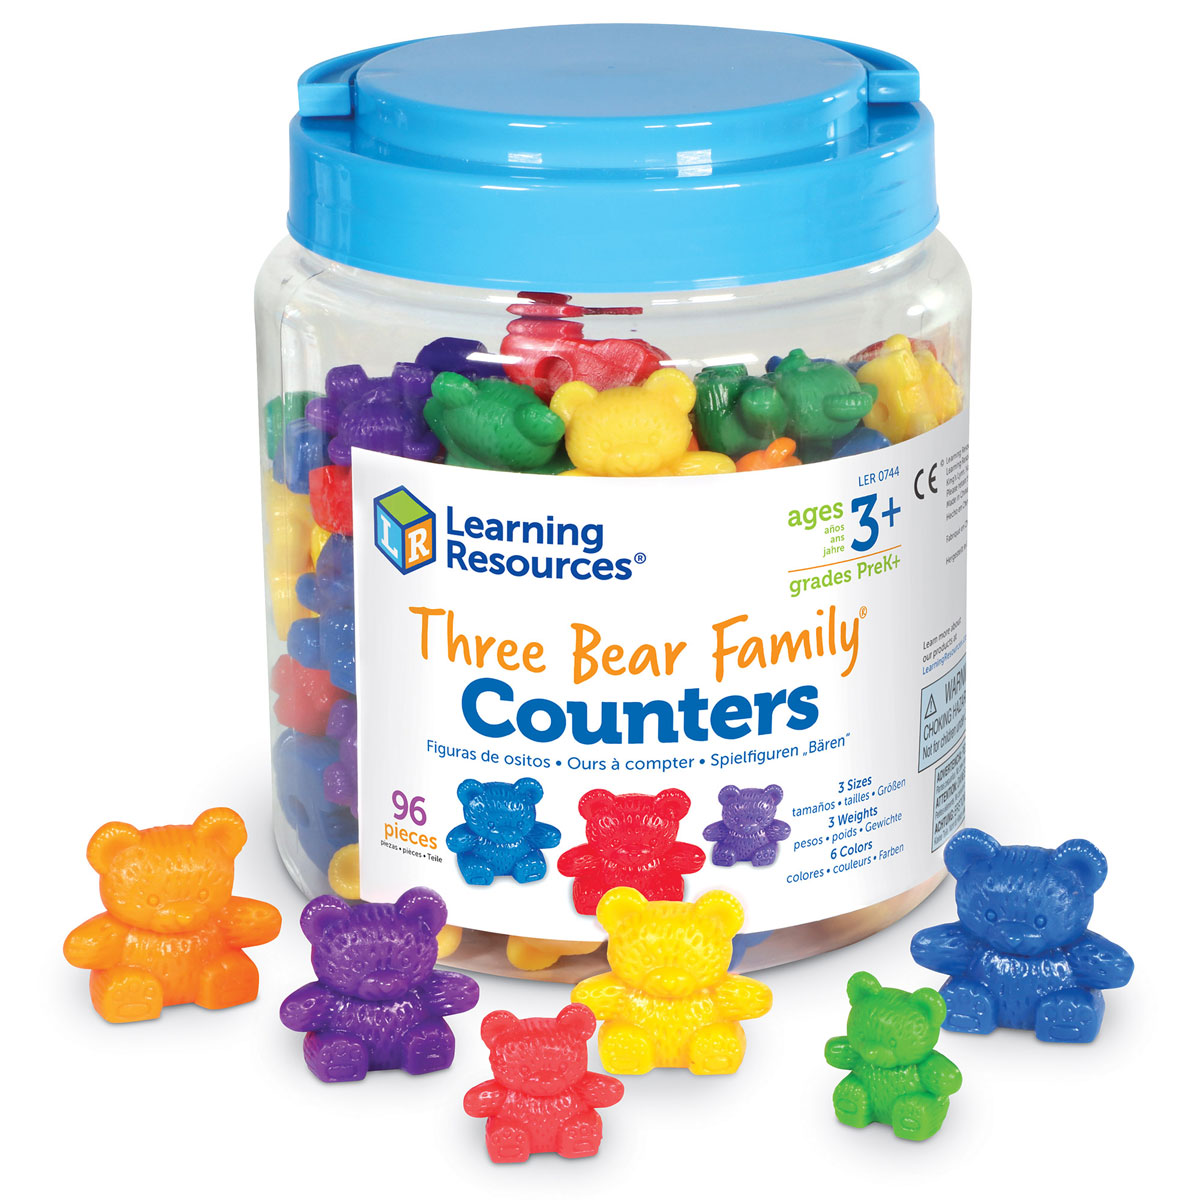 Three　Resources　Six　Family　Learning　96　by　of　Bear　LER0744　Colours　in　Counters　ICT　Set　Primary